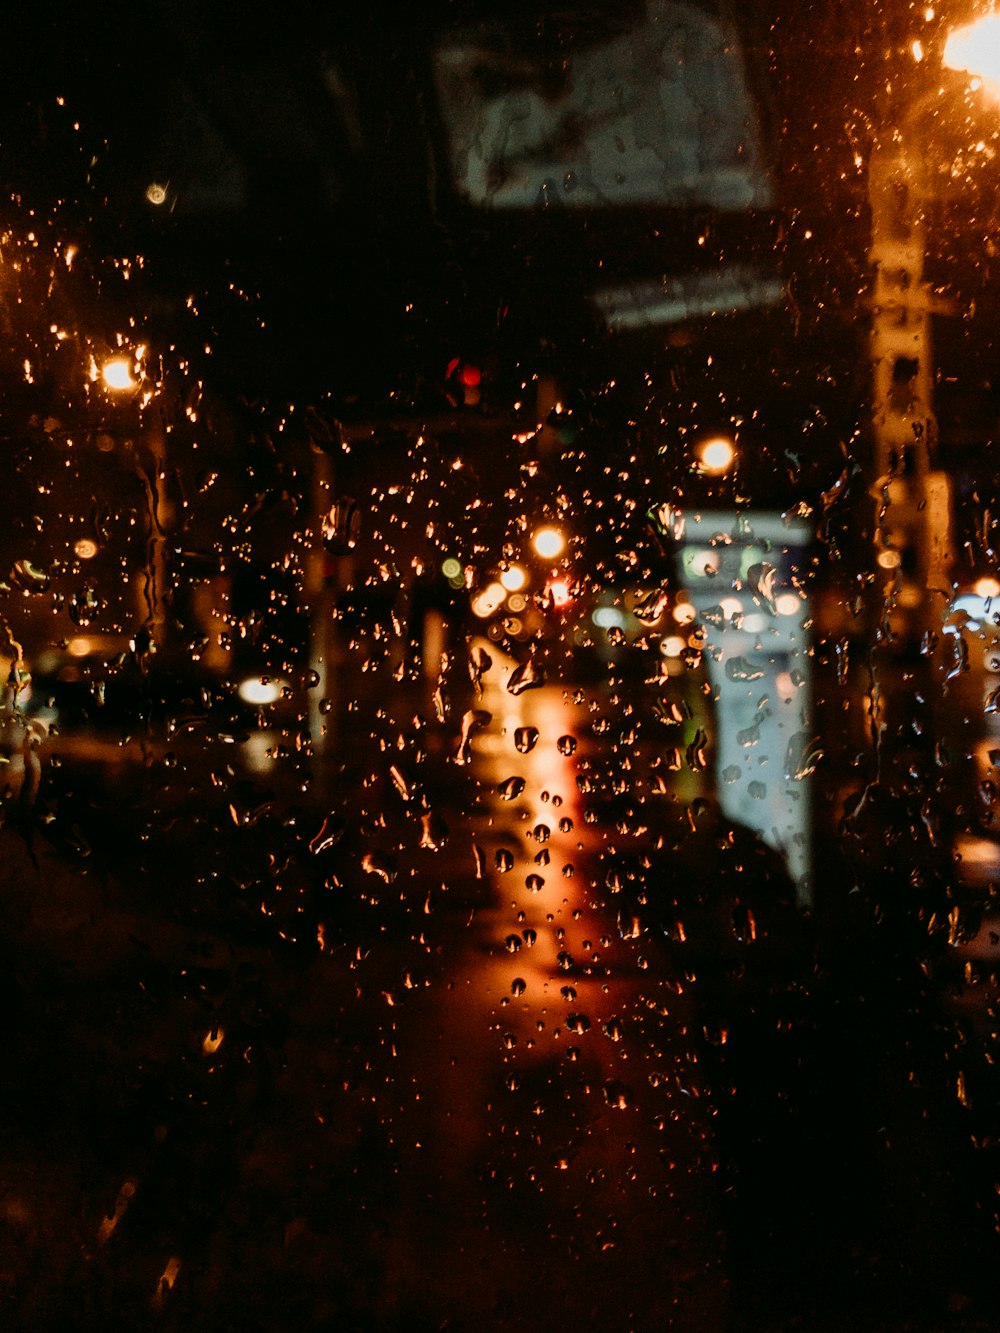 water droplets on glass window during night time